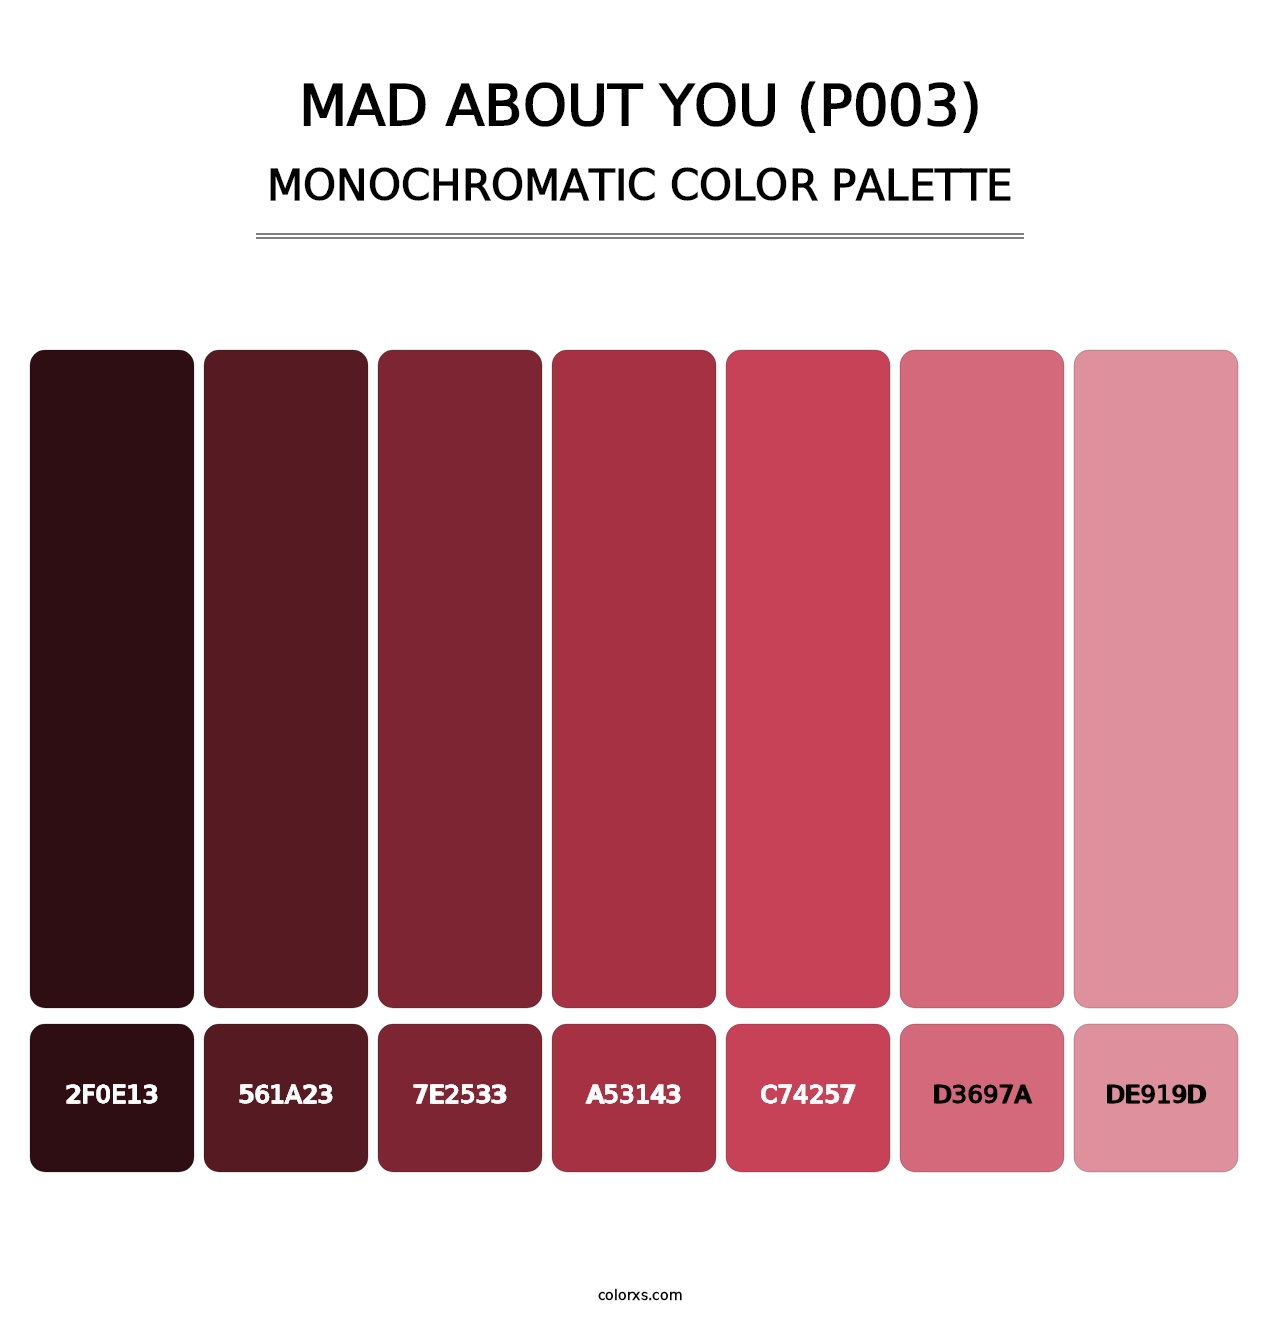 Mad About You (P003) - Monochromatic Color Palette